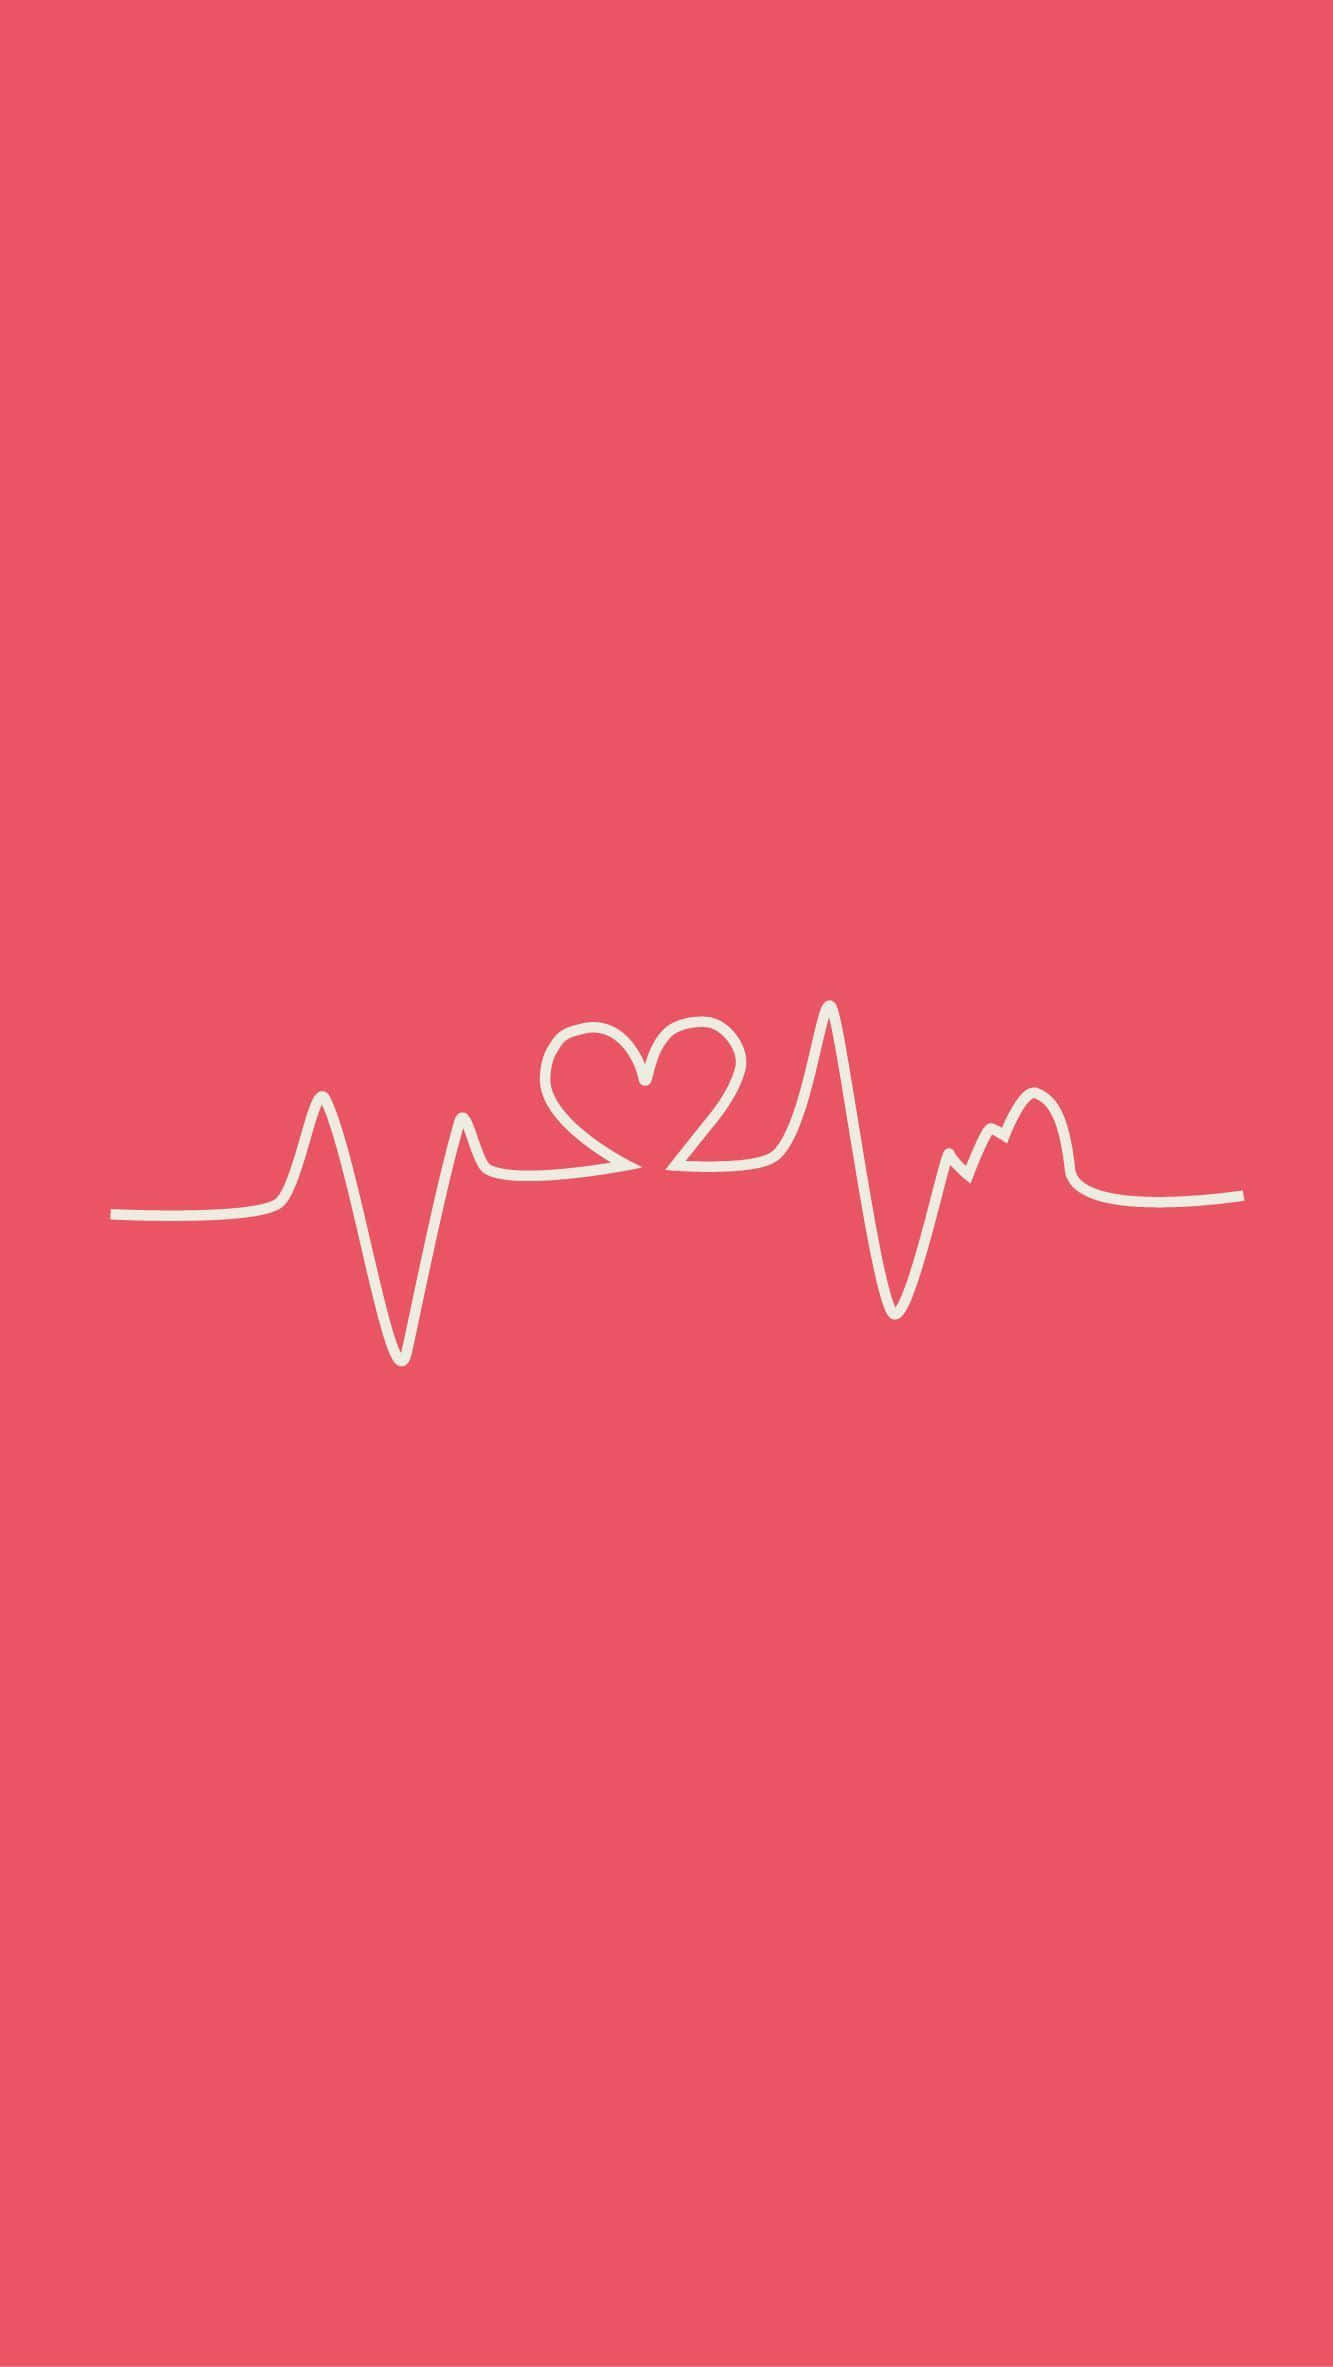 Heartbeat Line With Heart On Pink Background